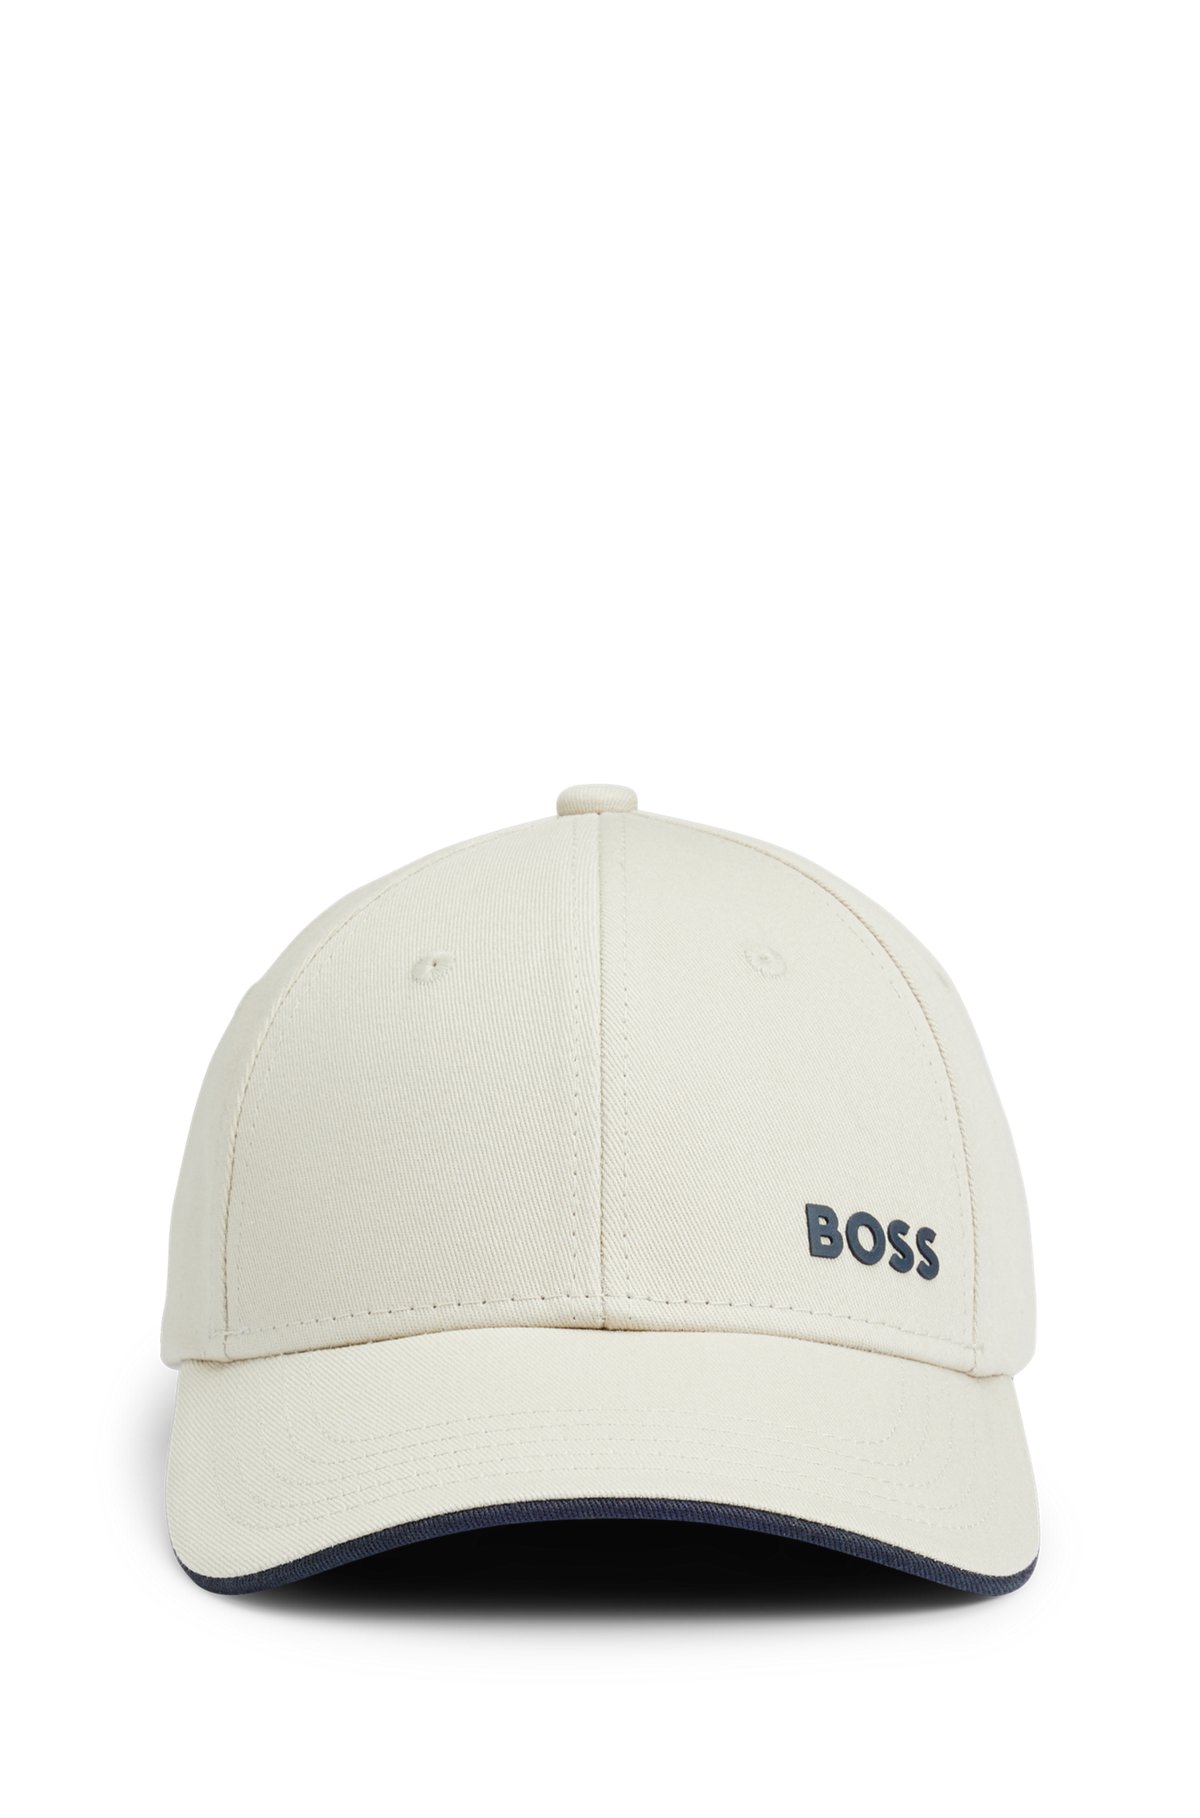 Cotton-twill cap with printed logo, Light Beige